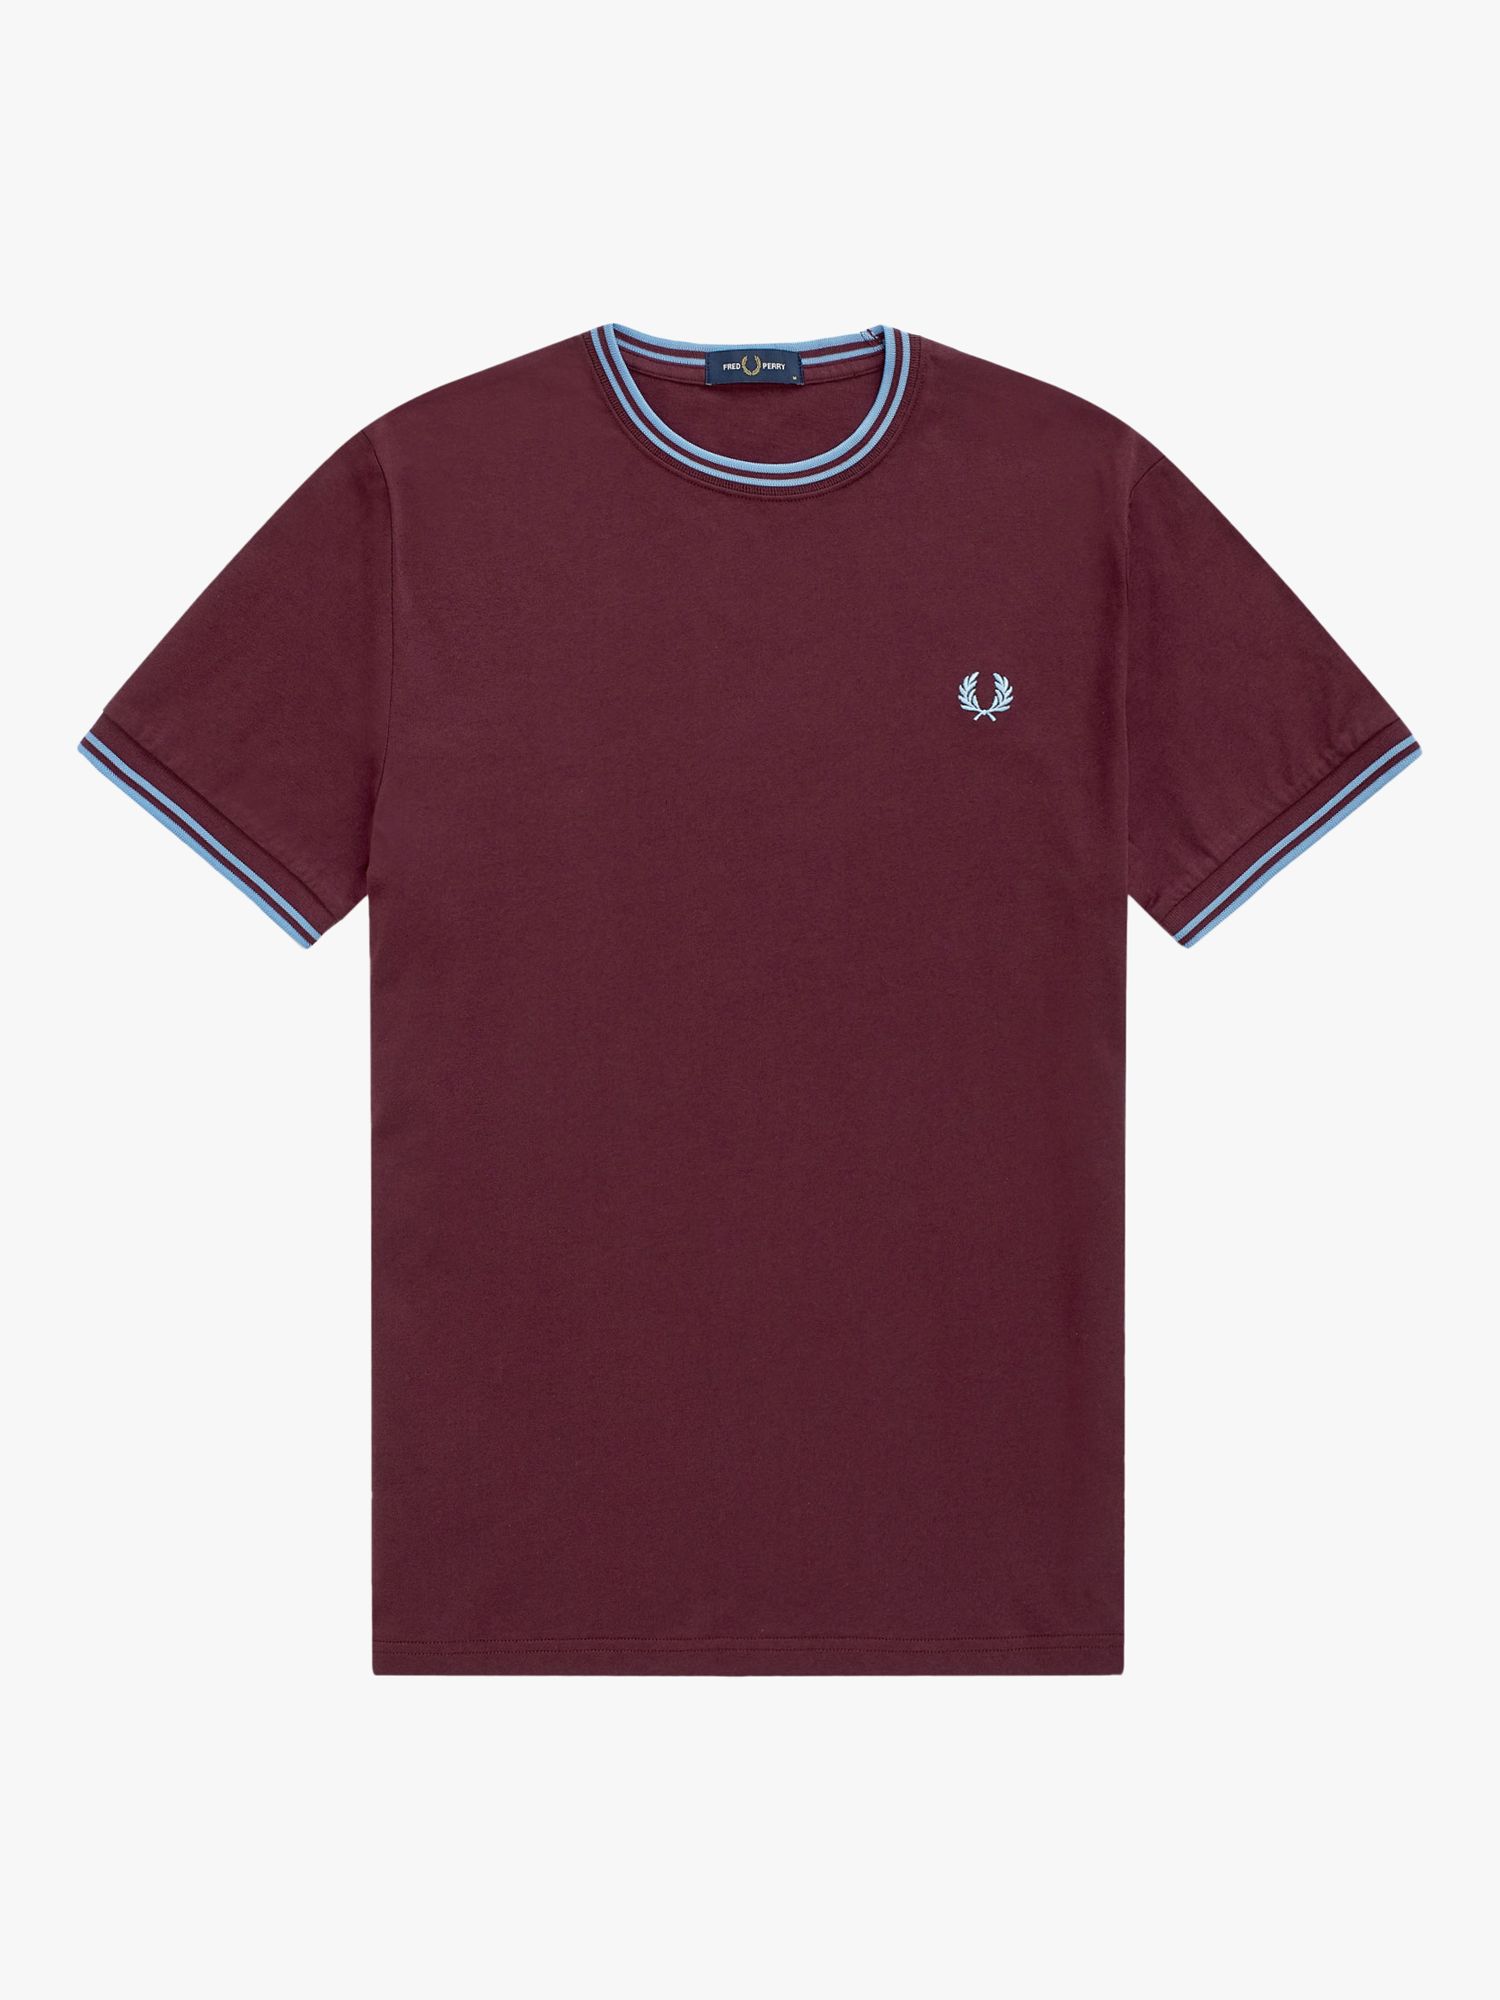 Fred Perry Crew Neck Twin Tipped T-Shirt at John Lewis & Partners